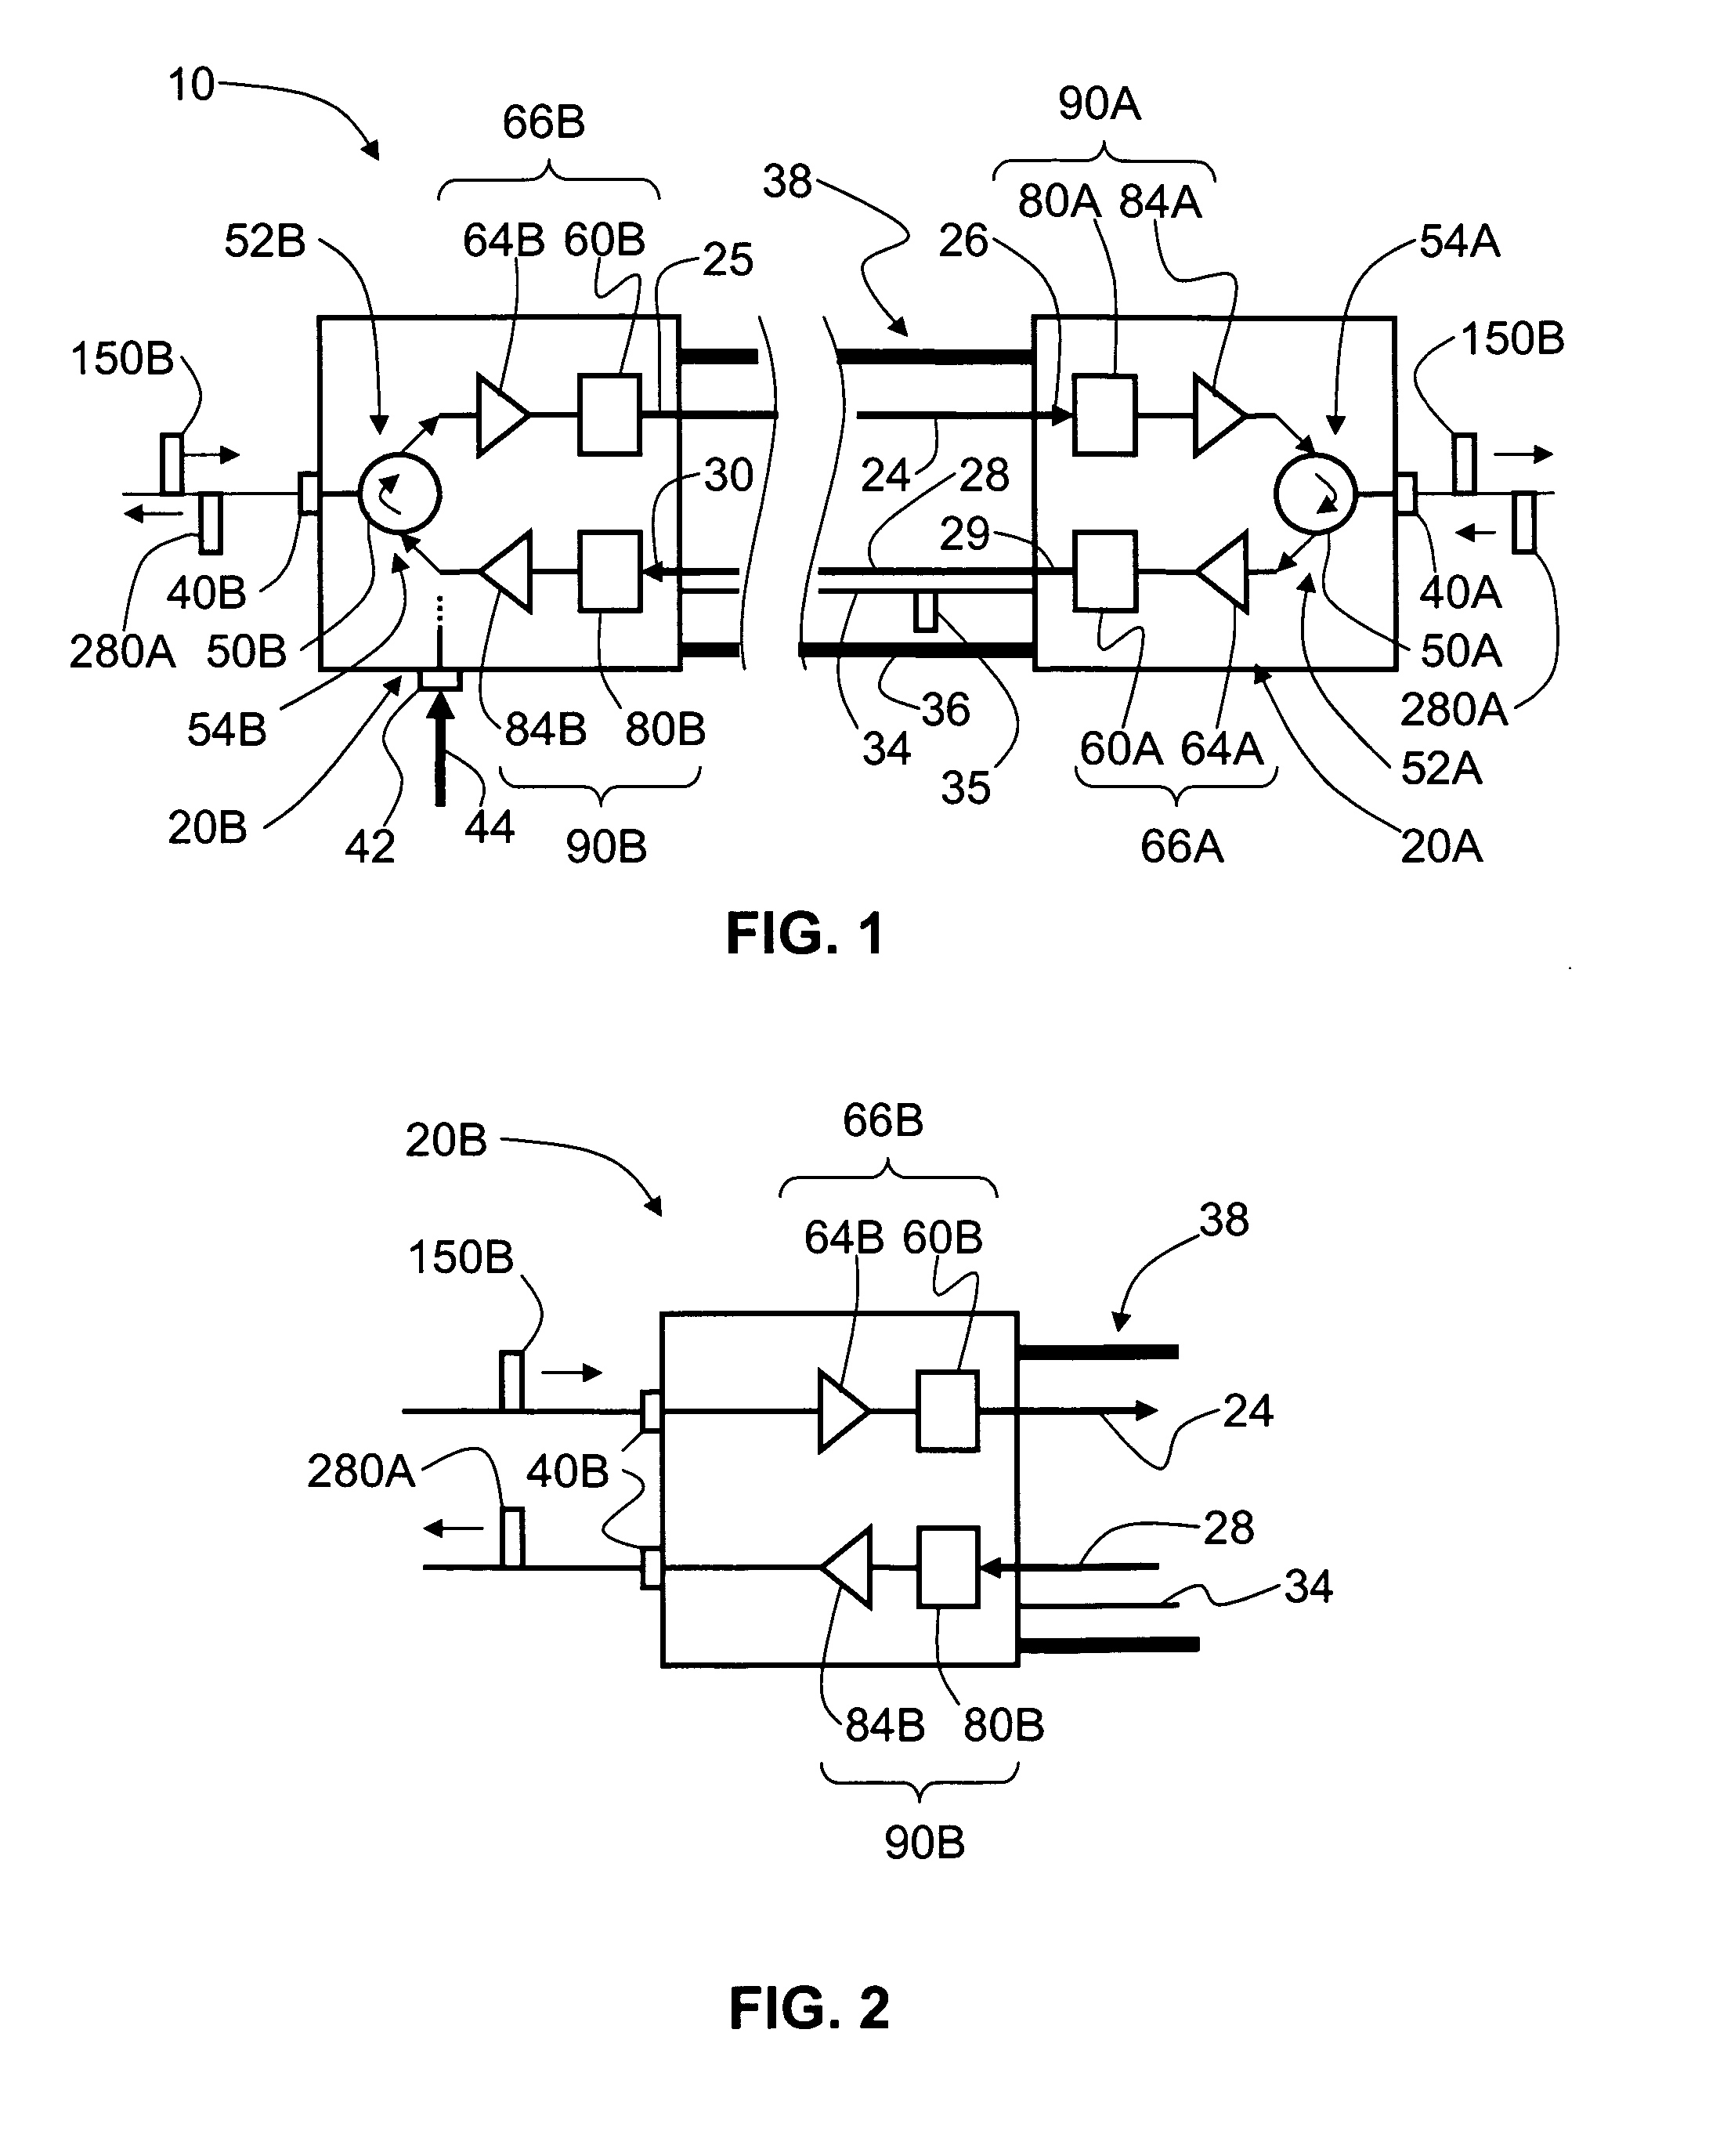 Electrical-optical cable for wireless systems